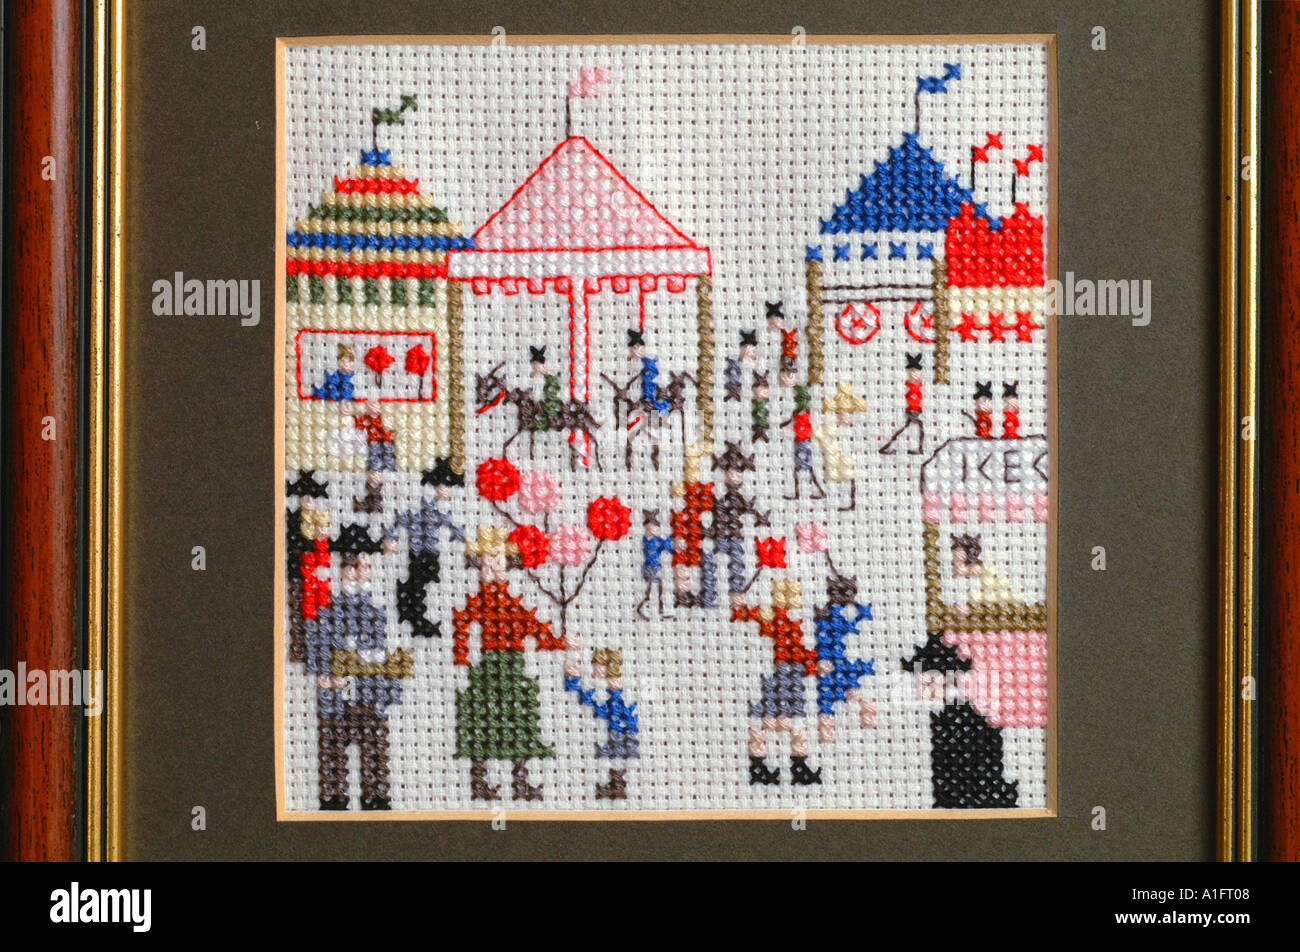 lowry cross stitch picture hand made Stock Photo